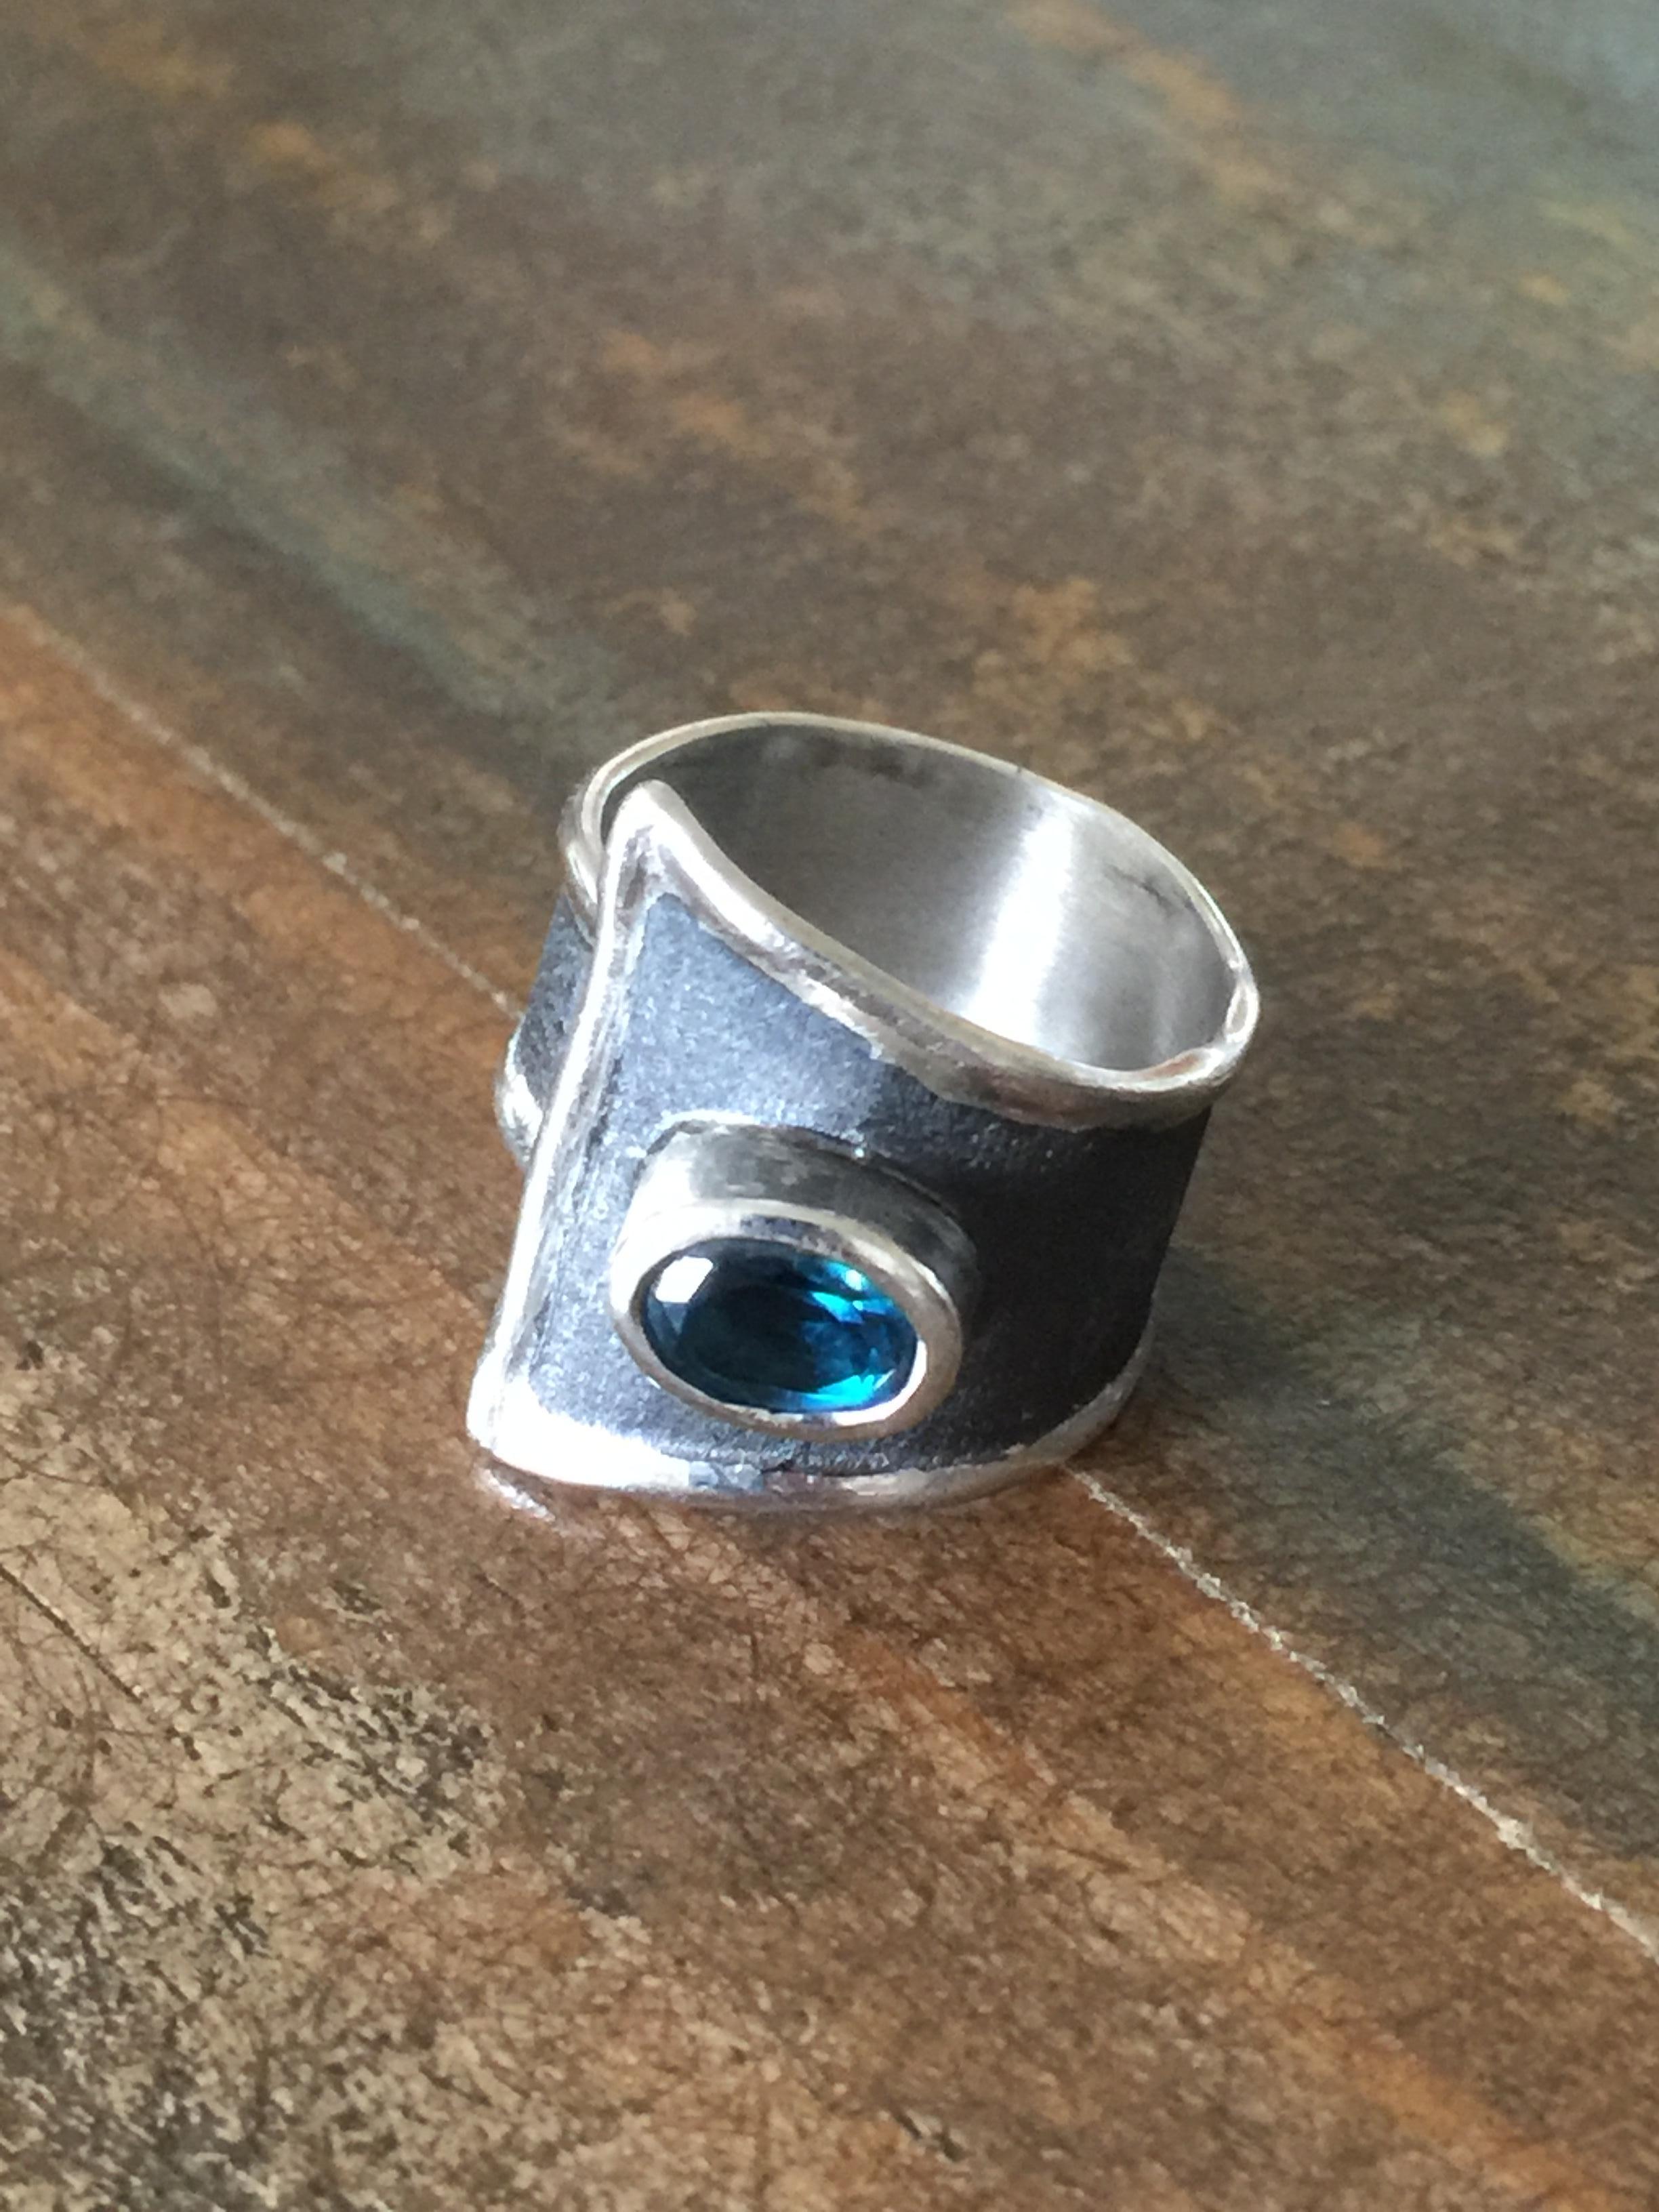 Presenting Unisex Yianni Creations handmade artisan ring from fine silver 950 purity plated with palladium to resist the elements. This ring is from Hephestos Collection where the brushed background is decorated with Black Rhodium. This geometrical